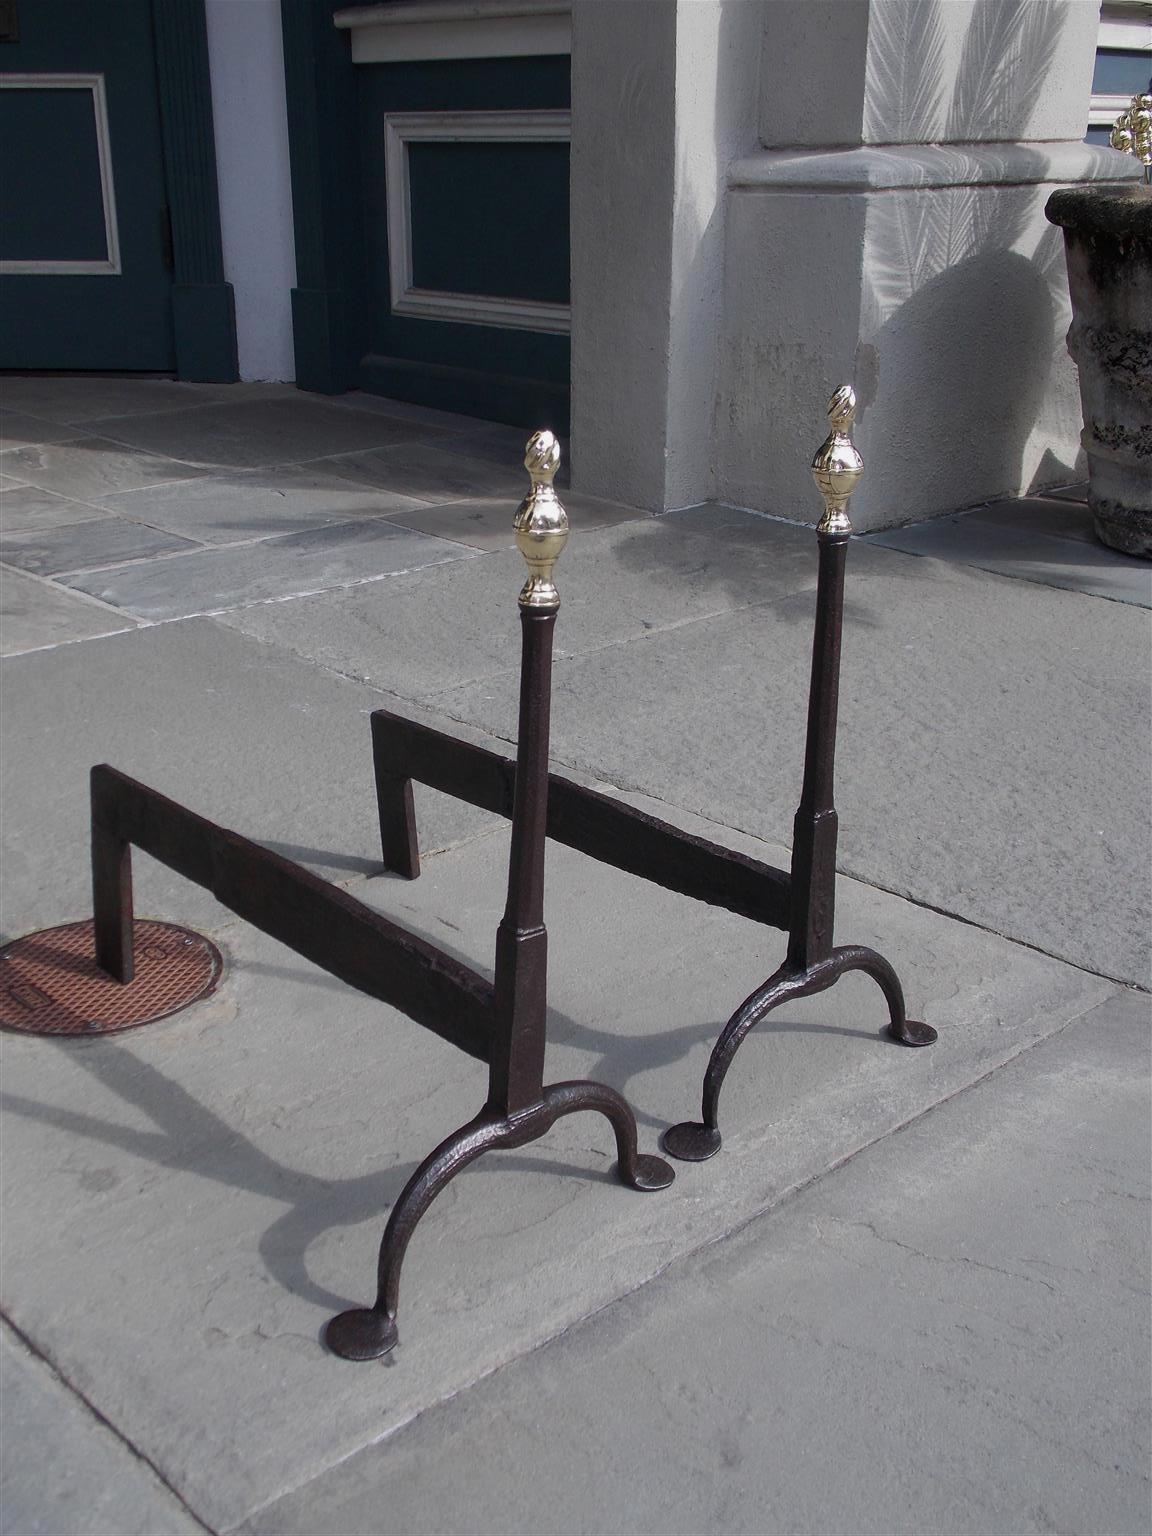 Pair of American brass flame finial lemon top and wrought iron andirons with centered circular faceted columns, squared plinths, original dog legs, and terminating on scrolled legs with penny feet. Late 18th Century